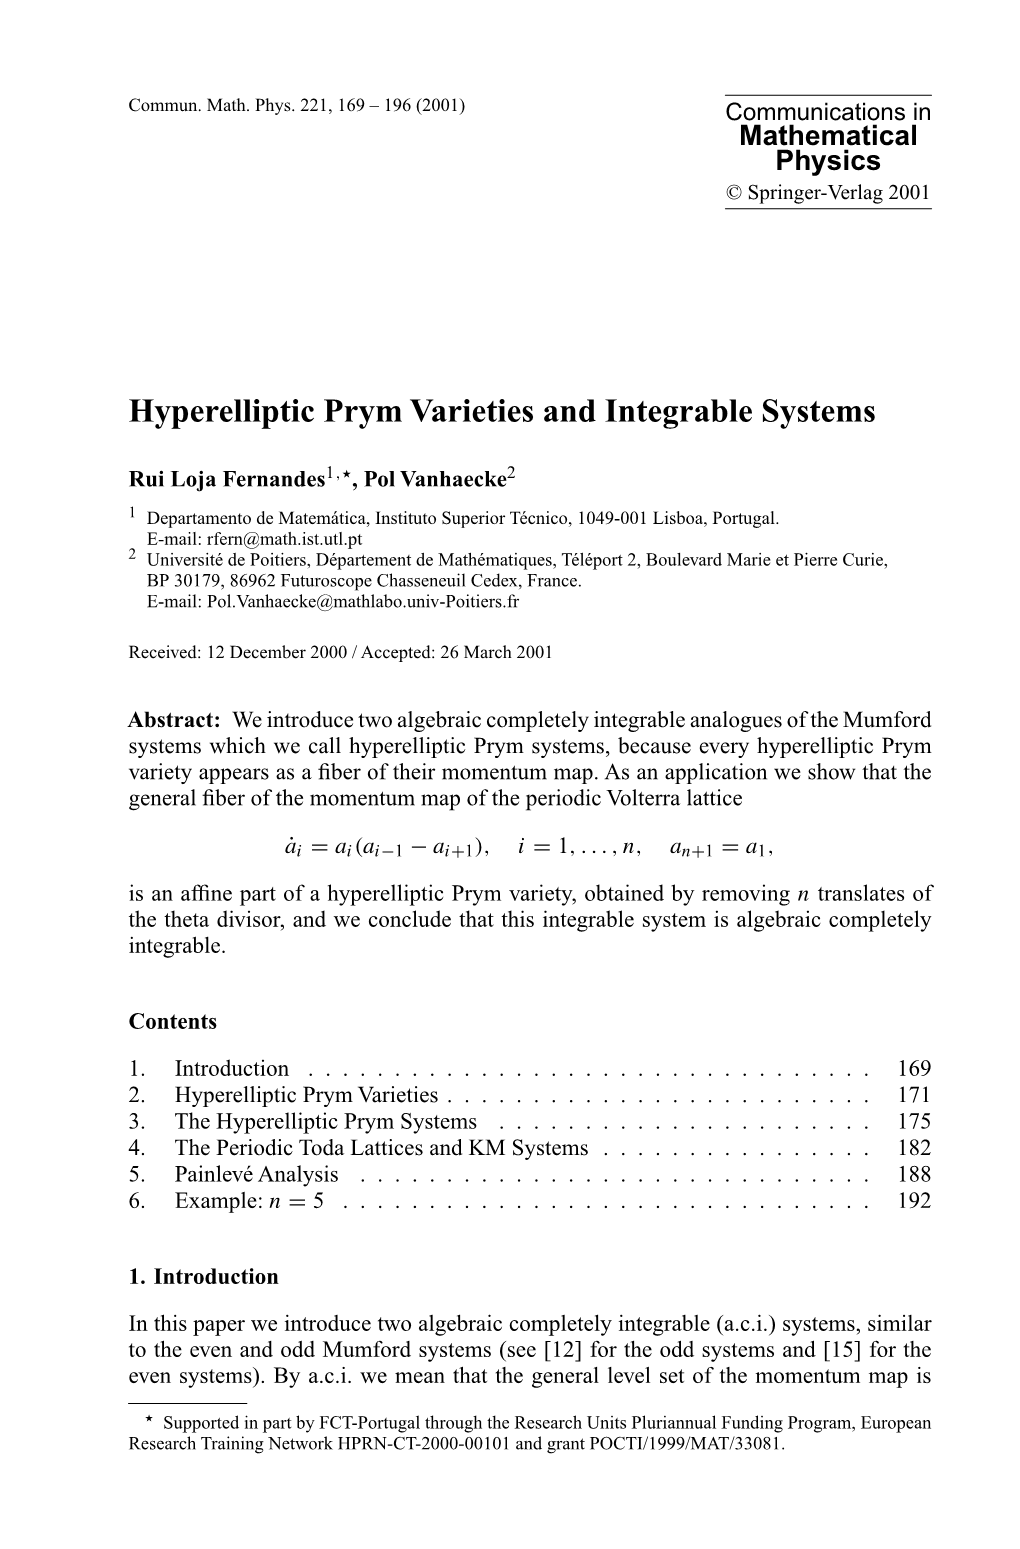 Hyperelliptic Prym Varieties and Integrable Systems